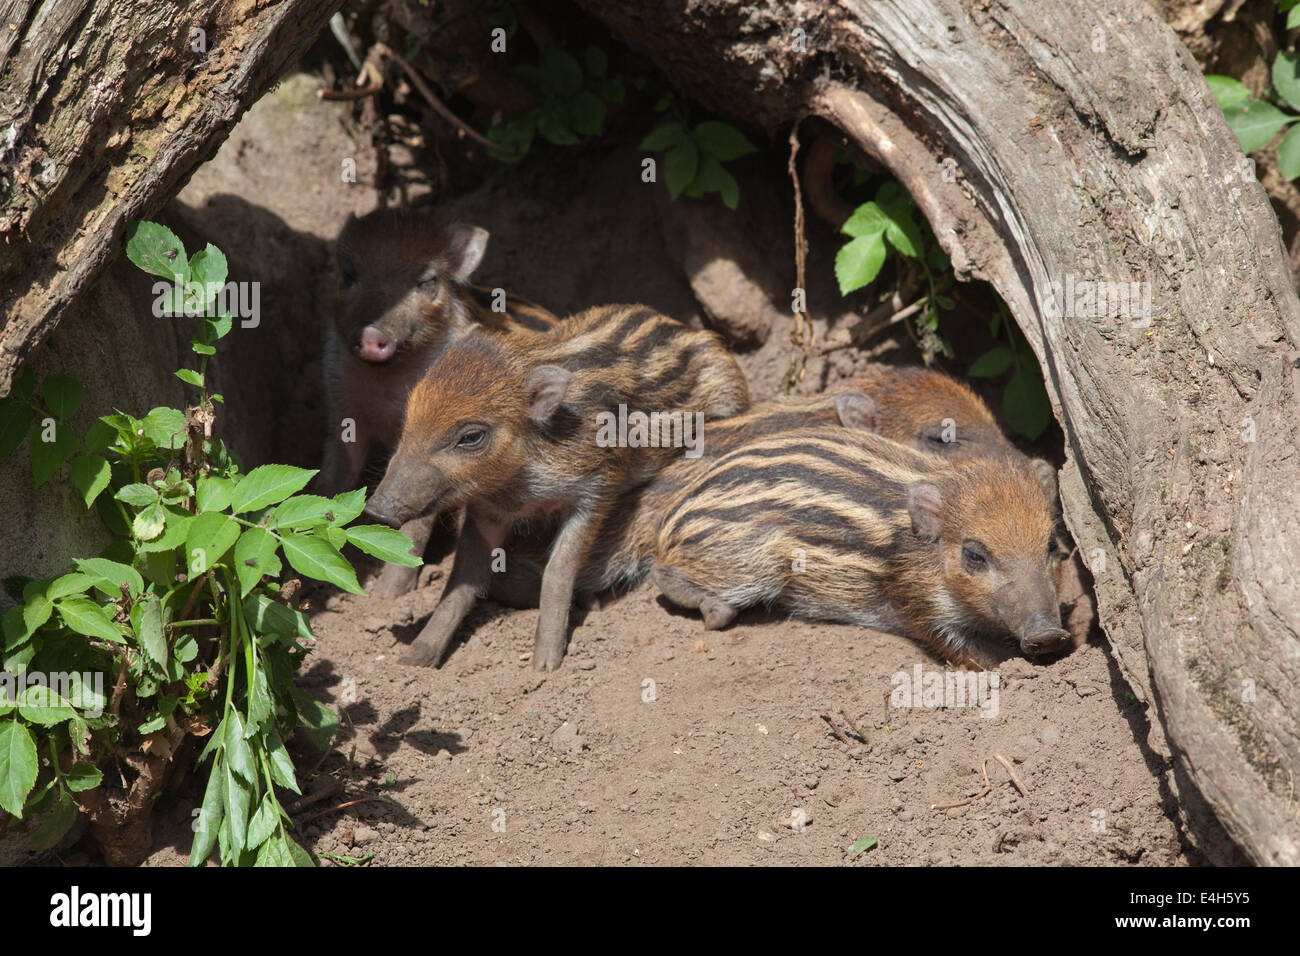 Visayan Warty Pigs or Hogs (Sus cebifrons). One month old Piglets. Thrigby Wildlife Gardens. July 2014. Stock Photo